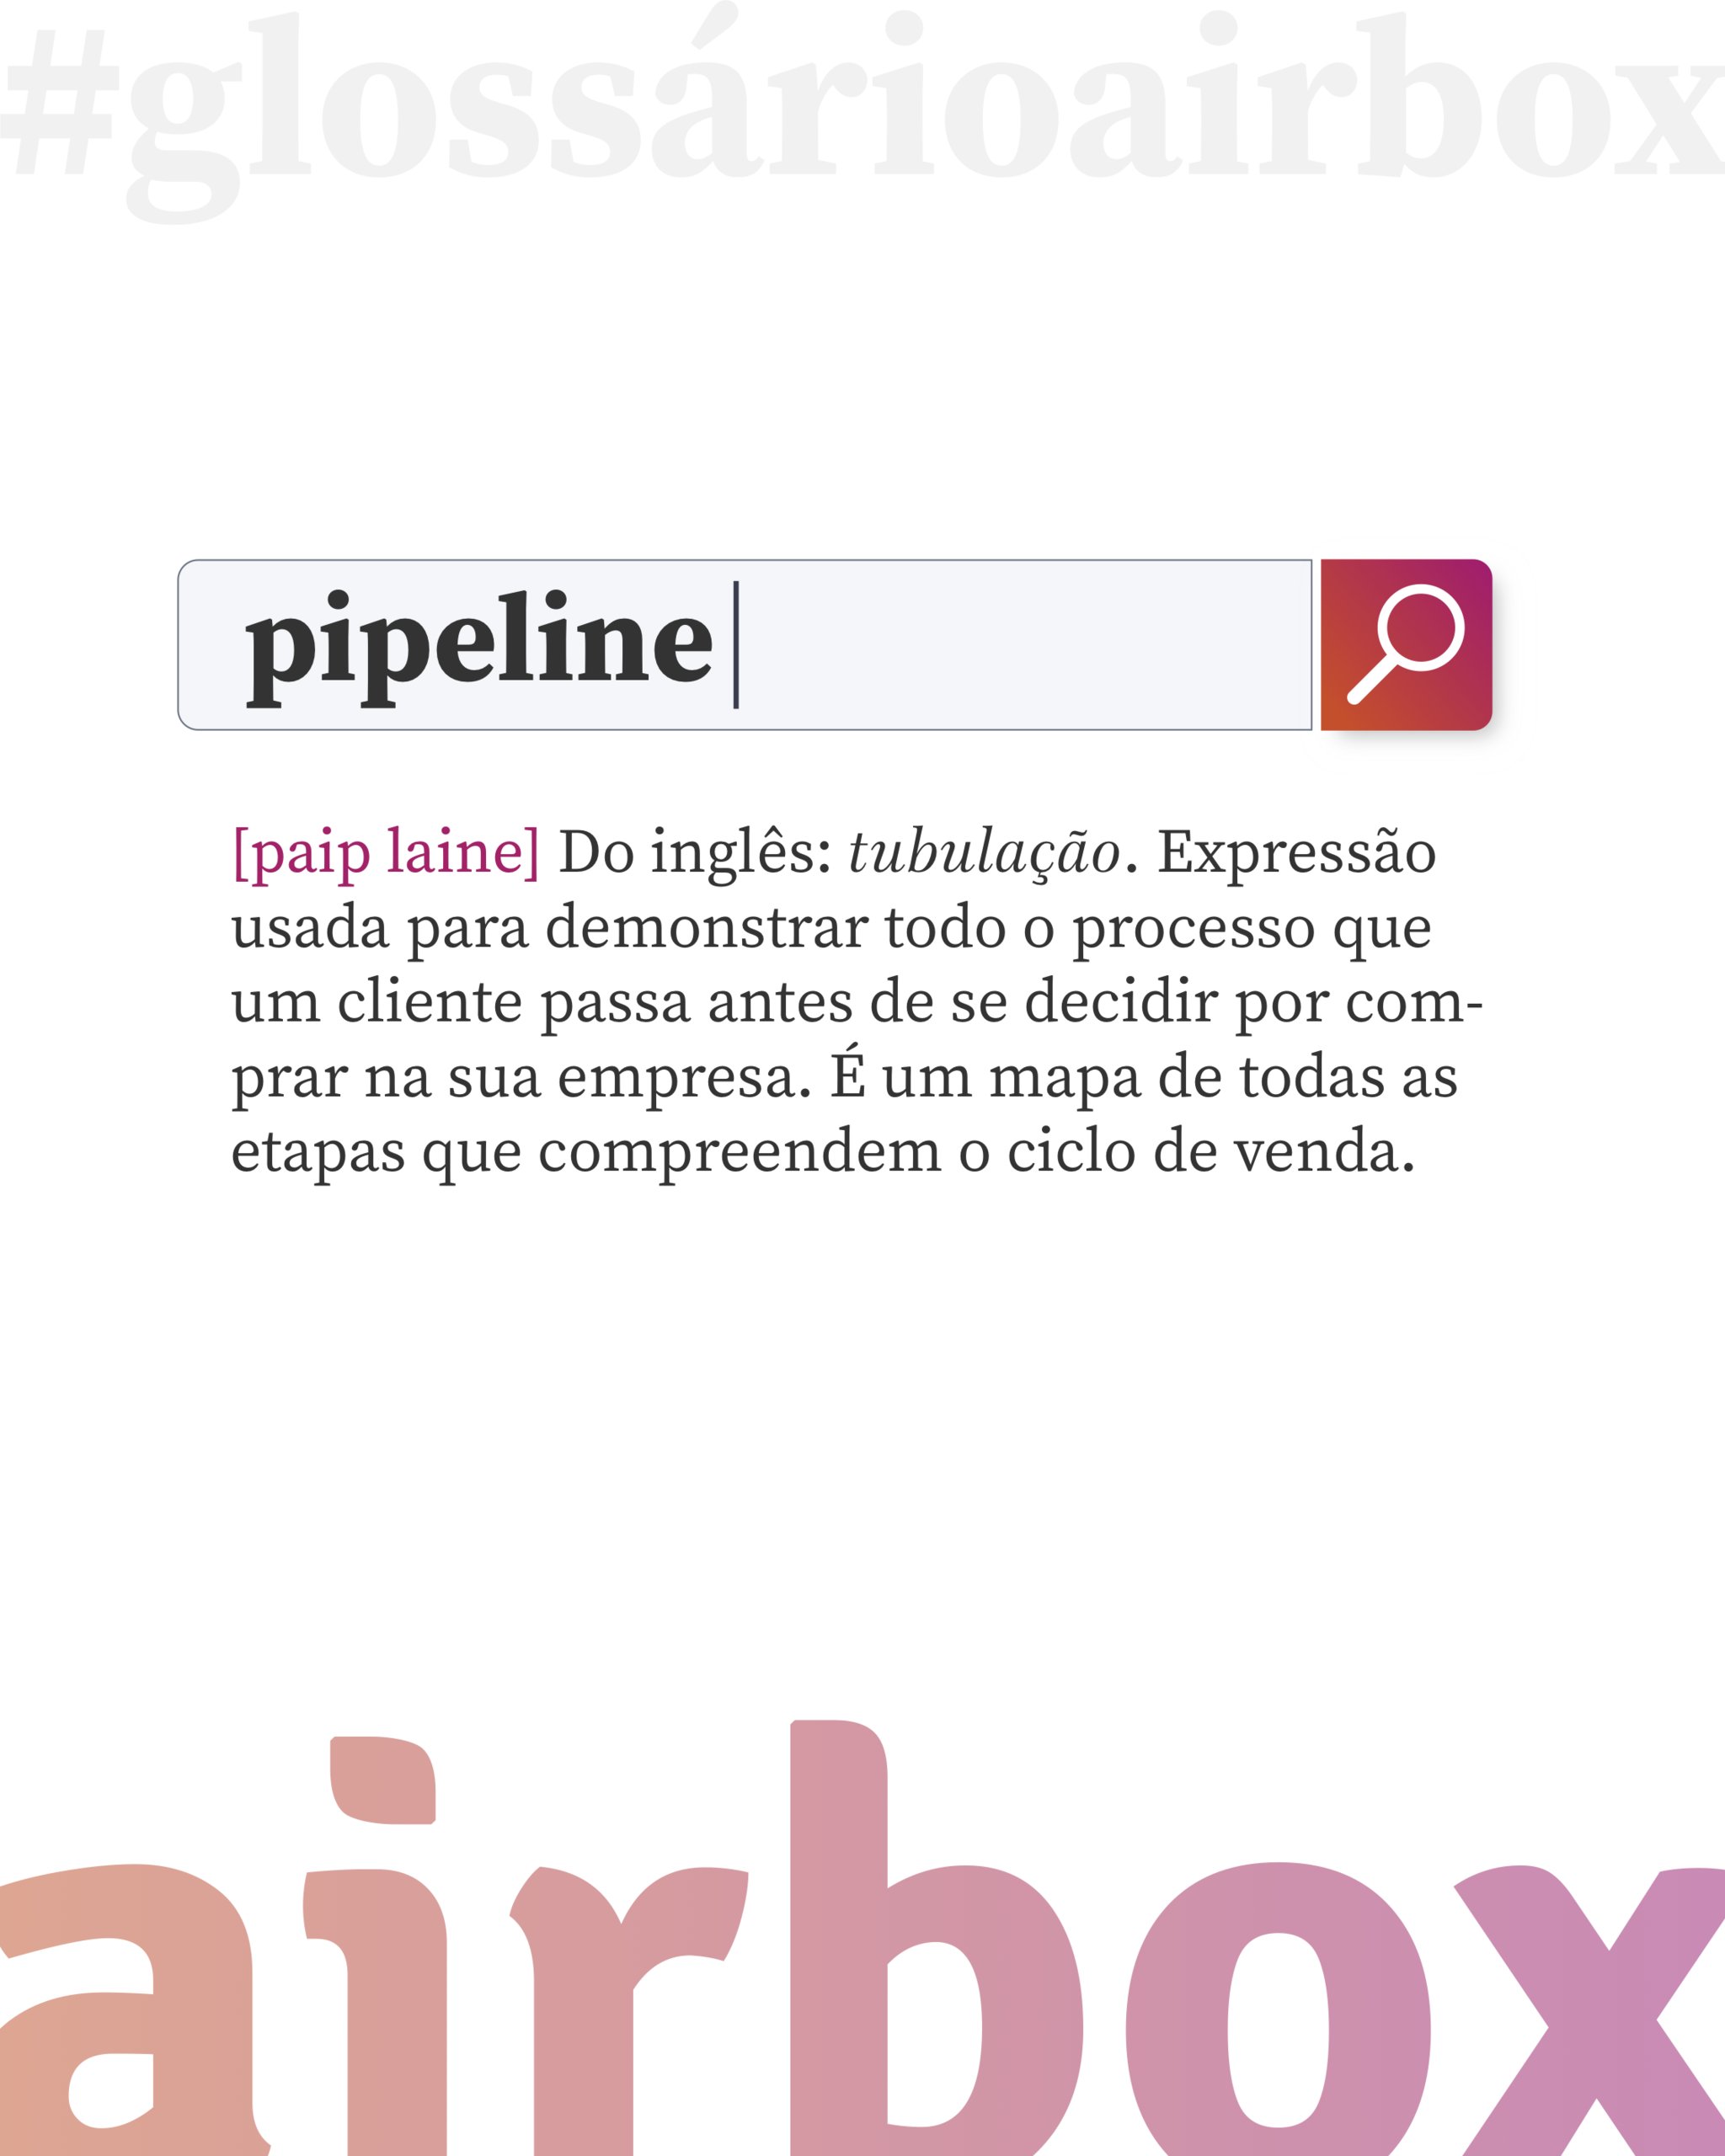 PIPELINE: o que significa a expressão IN THE PIPELINE?